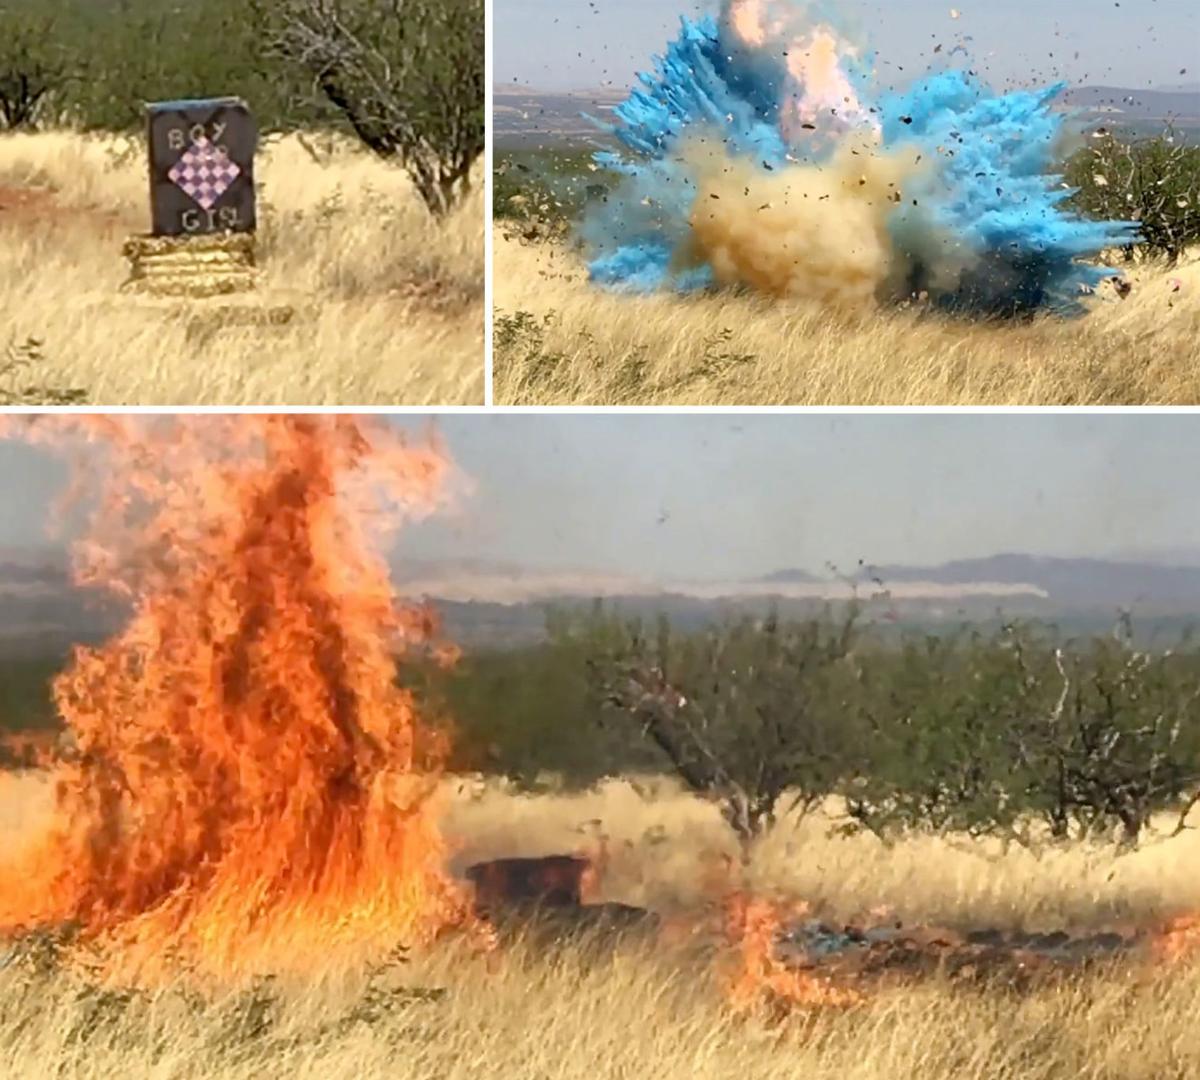 Watch Explosion At Border Agents Gender Reveal Party That Sparked Huge